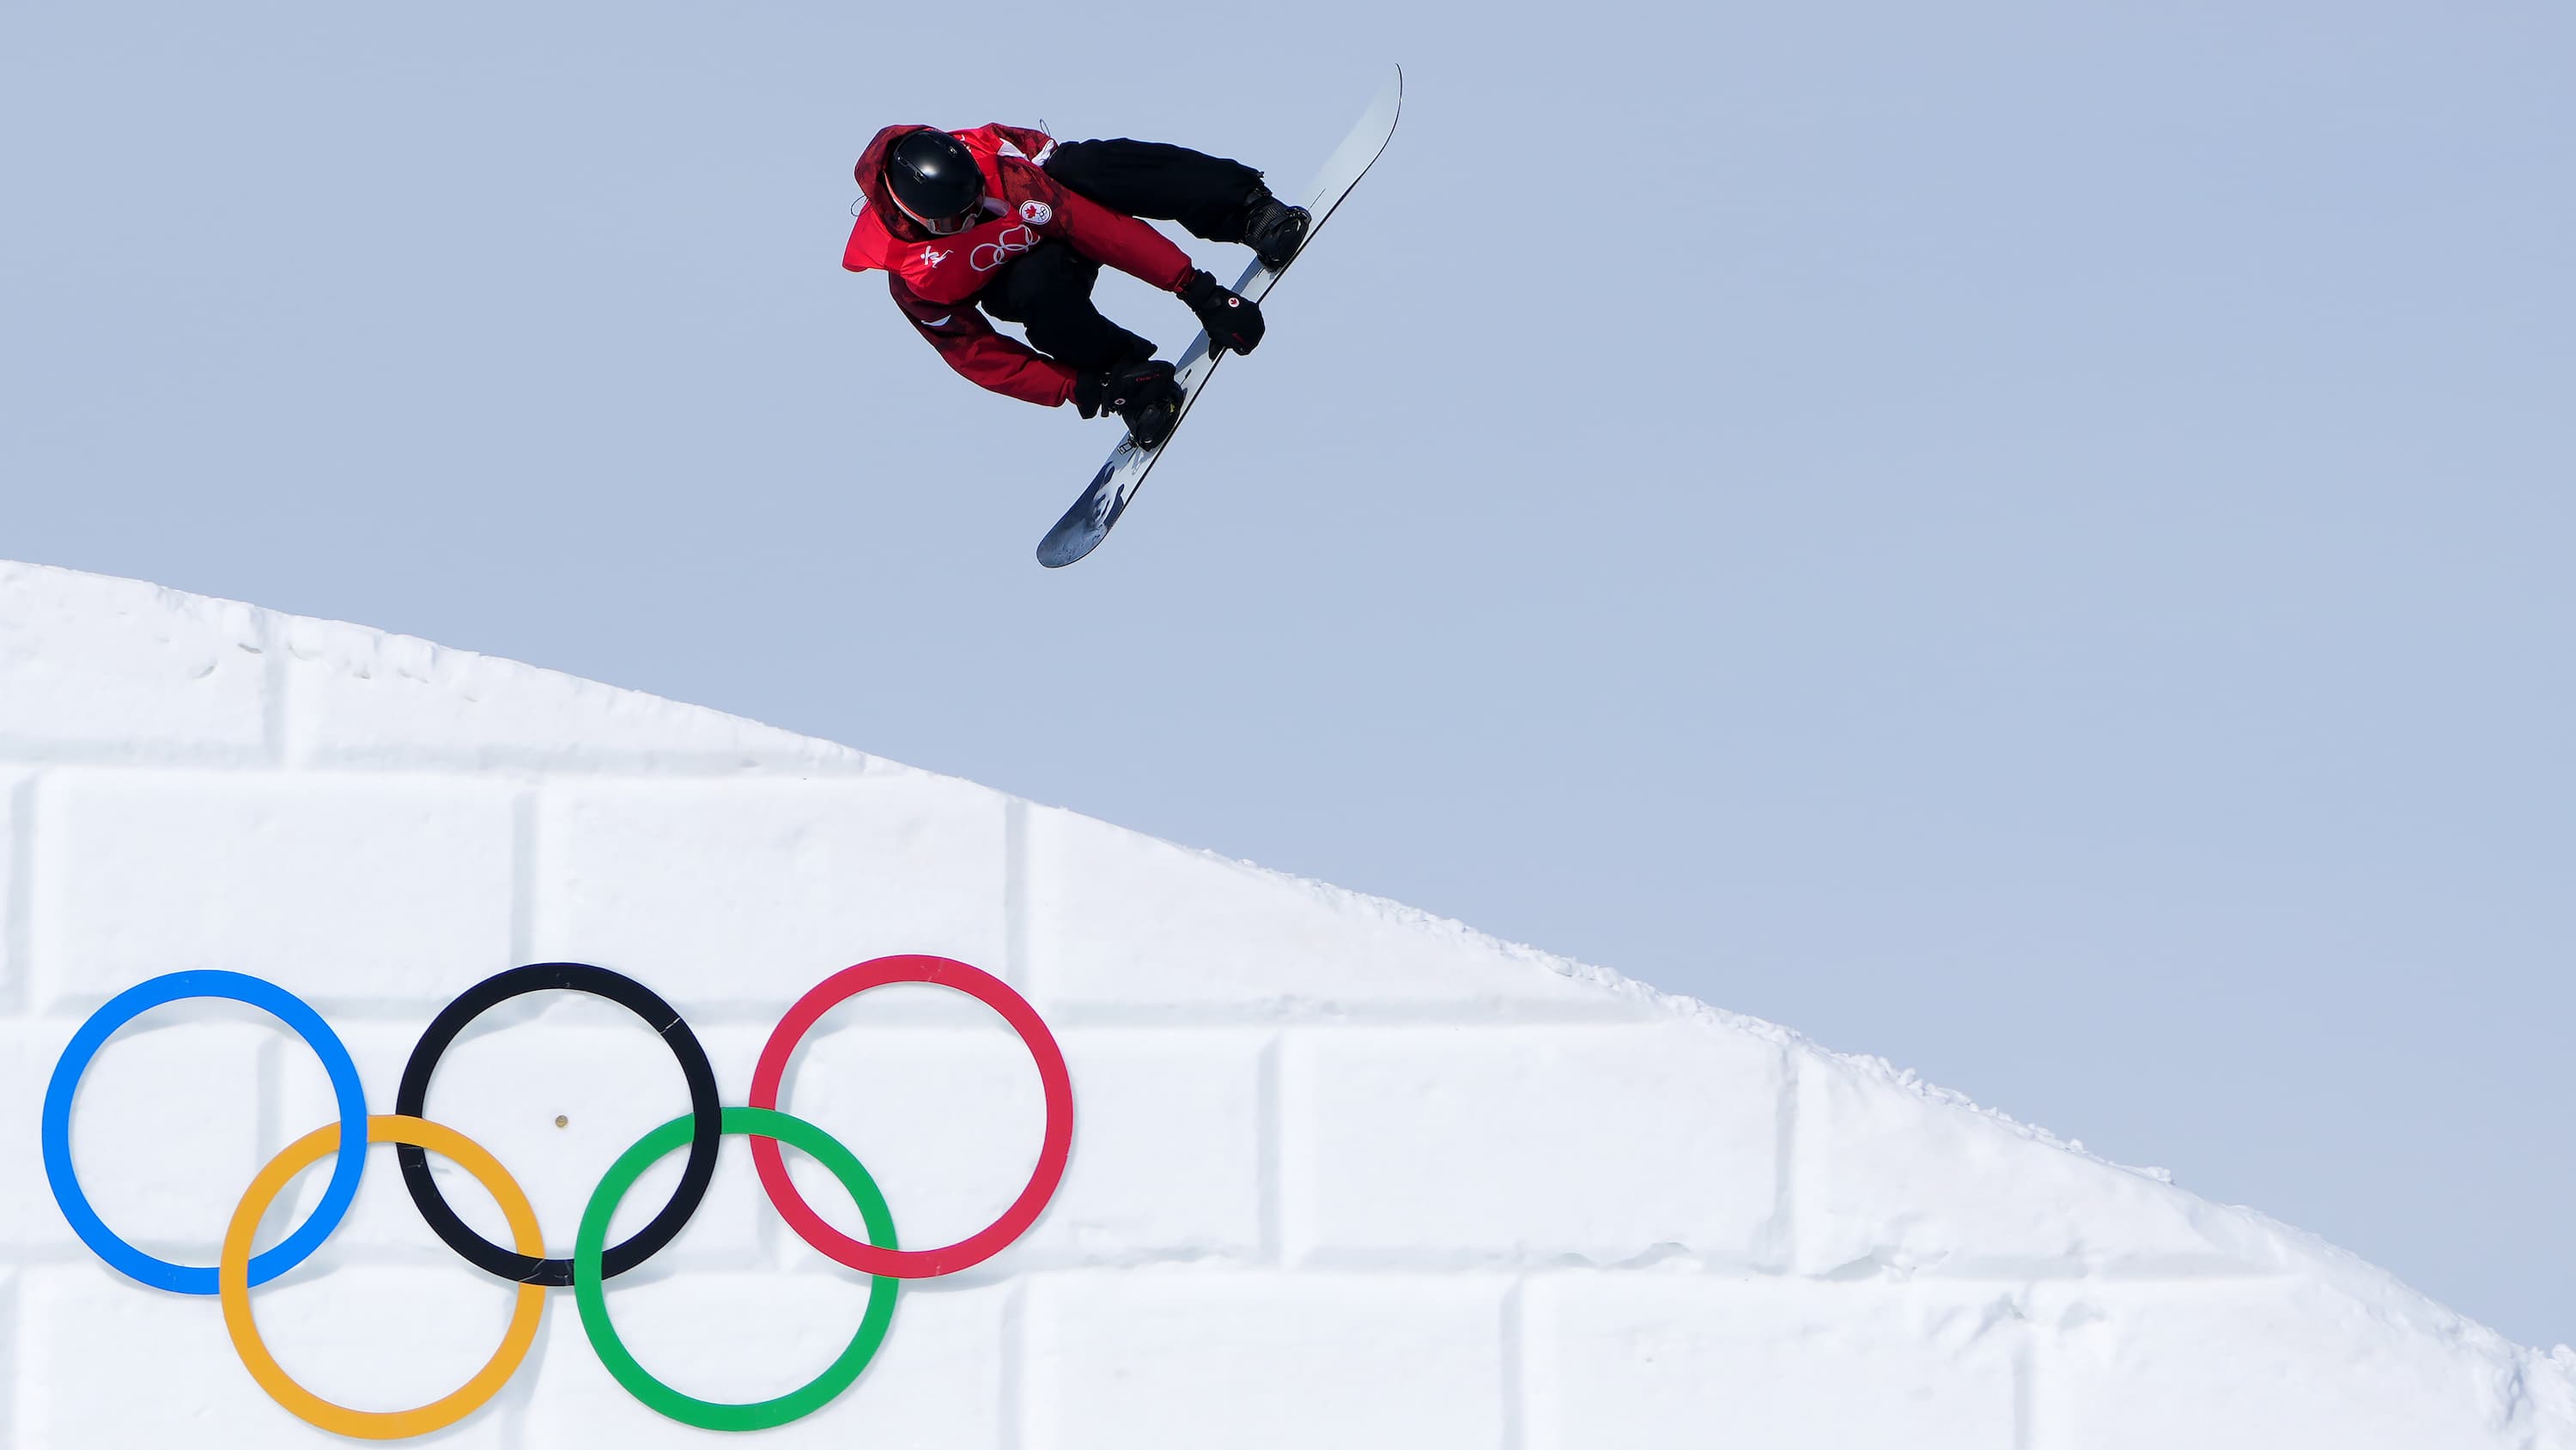 Snowboarder Max Parrot soars to Canada's 1st gold medal at Beijing Olympics, McMorris adds bronze